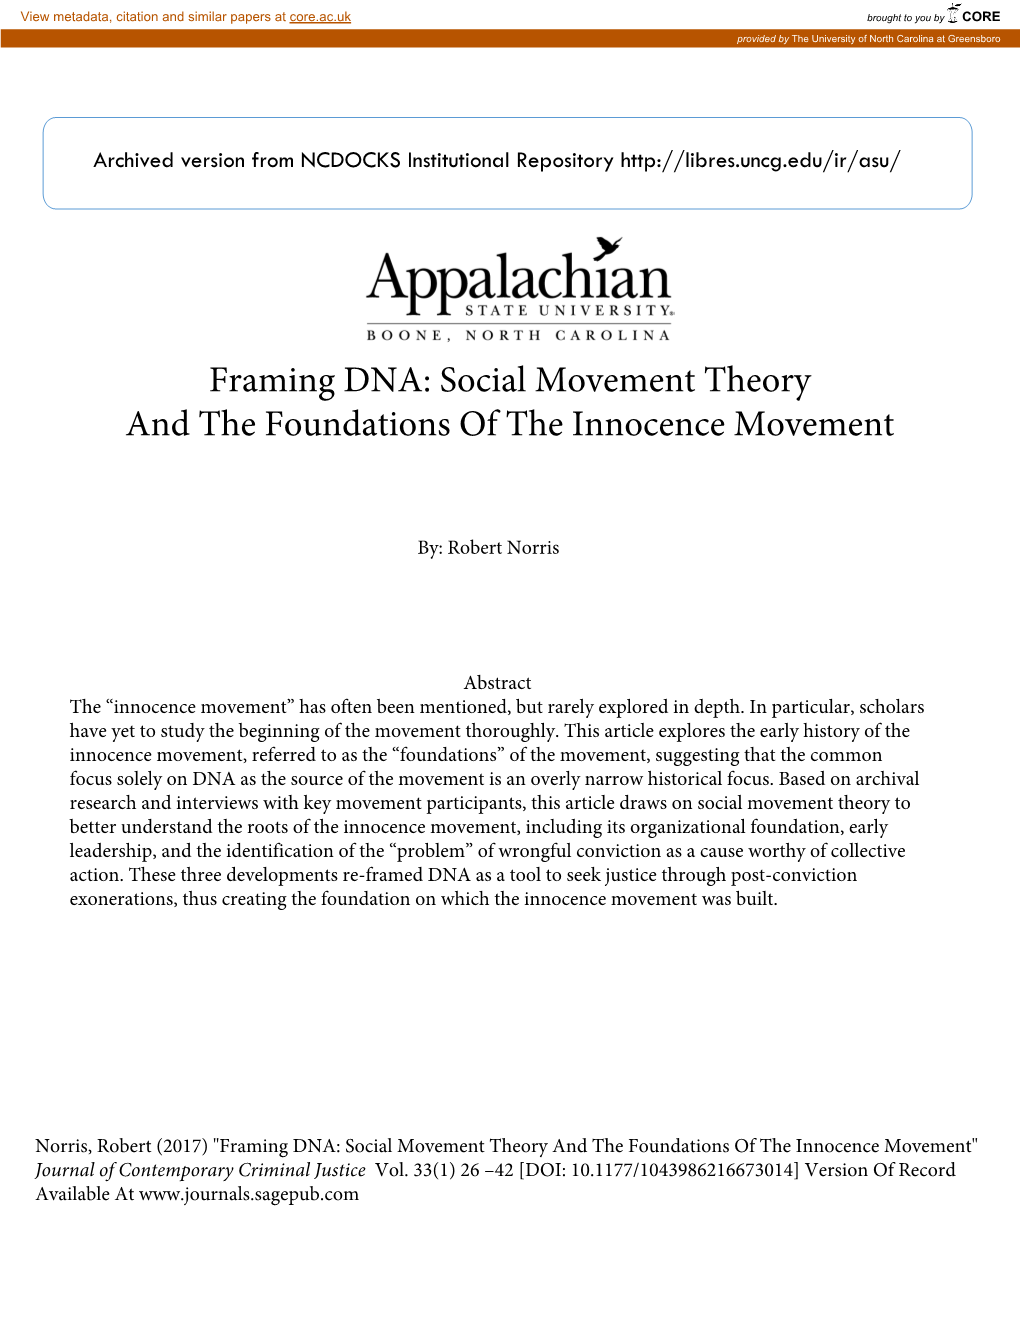 Framing DNA: Social Movement Theory and the Foundations of the Innocence Movement